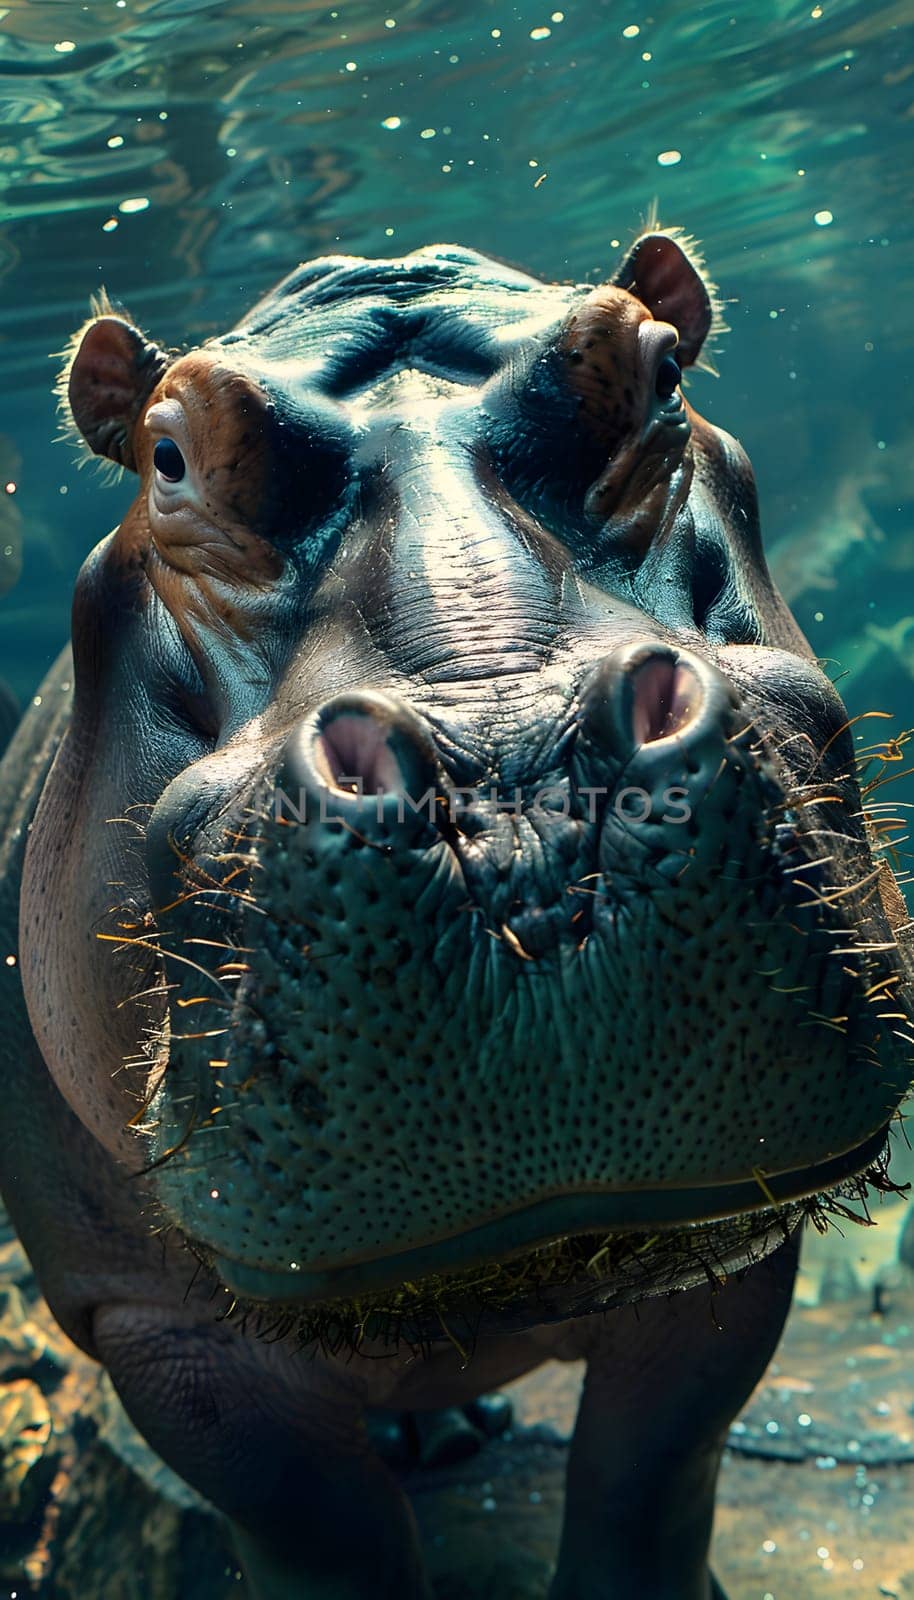 A hippopotamus, a terrestrial animal with a large body and adapted for aquatic life, is swimming in the water and fixing its gaze on the camera with its big eyes and wide jaw